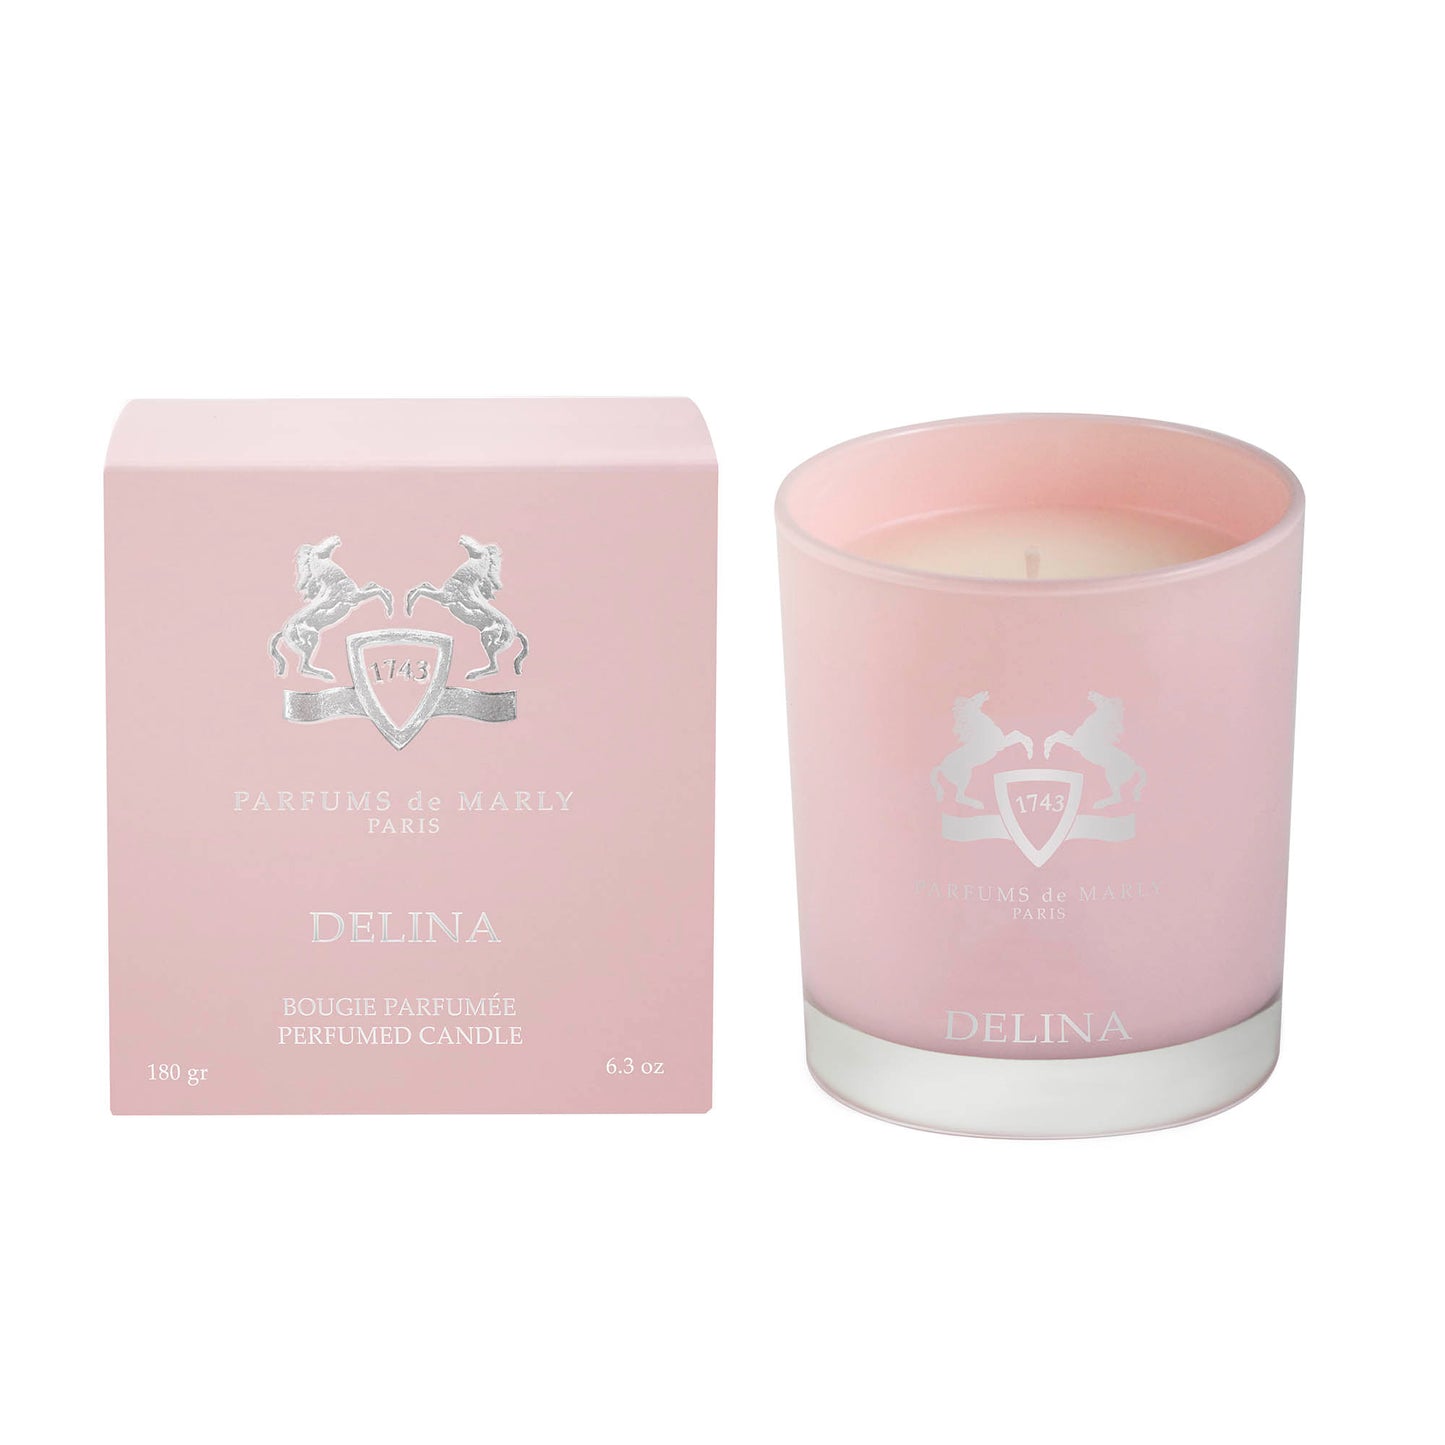 DELINA Candle - 180g